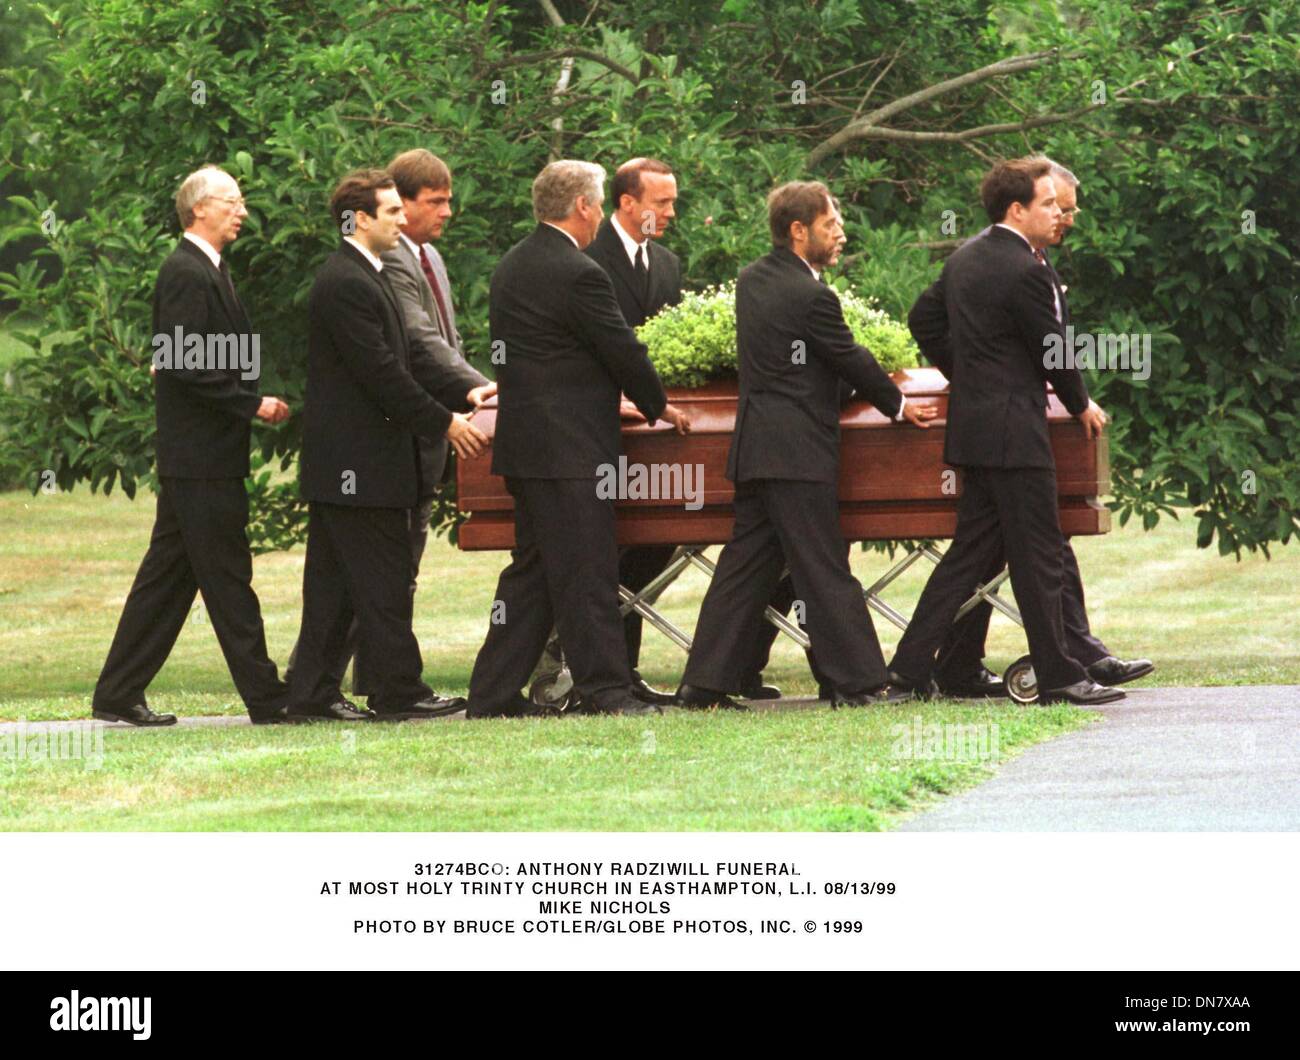 Aug. 13, 1999 - 31274BCO.ANTHONY RADZIWILL FUNERAL SERVICE MOST HOLY ...